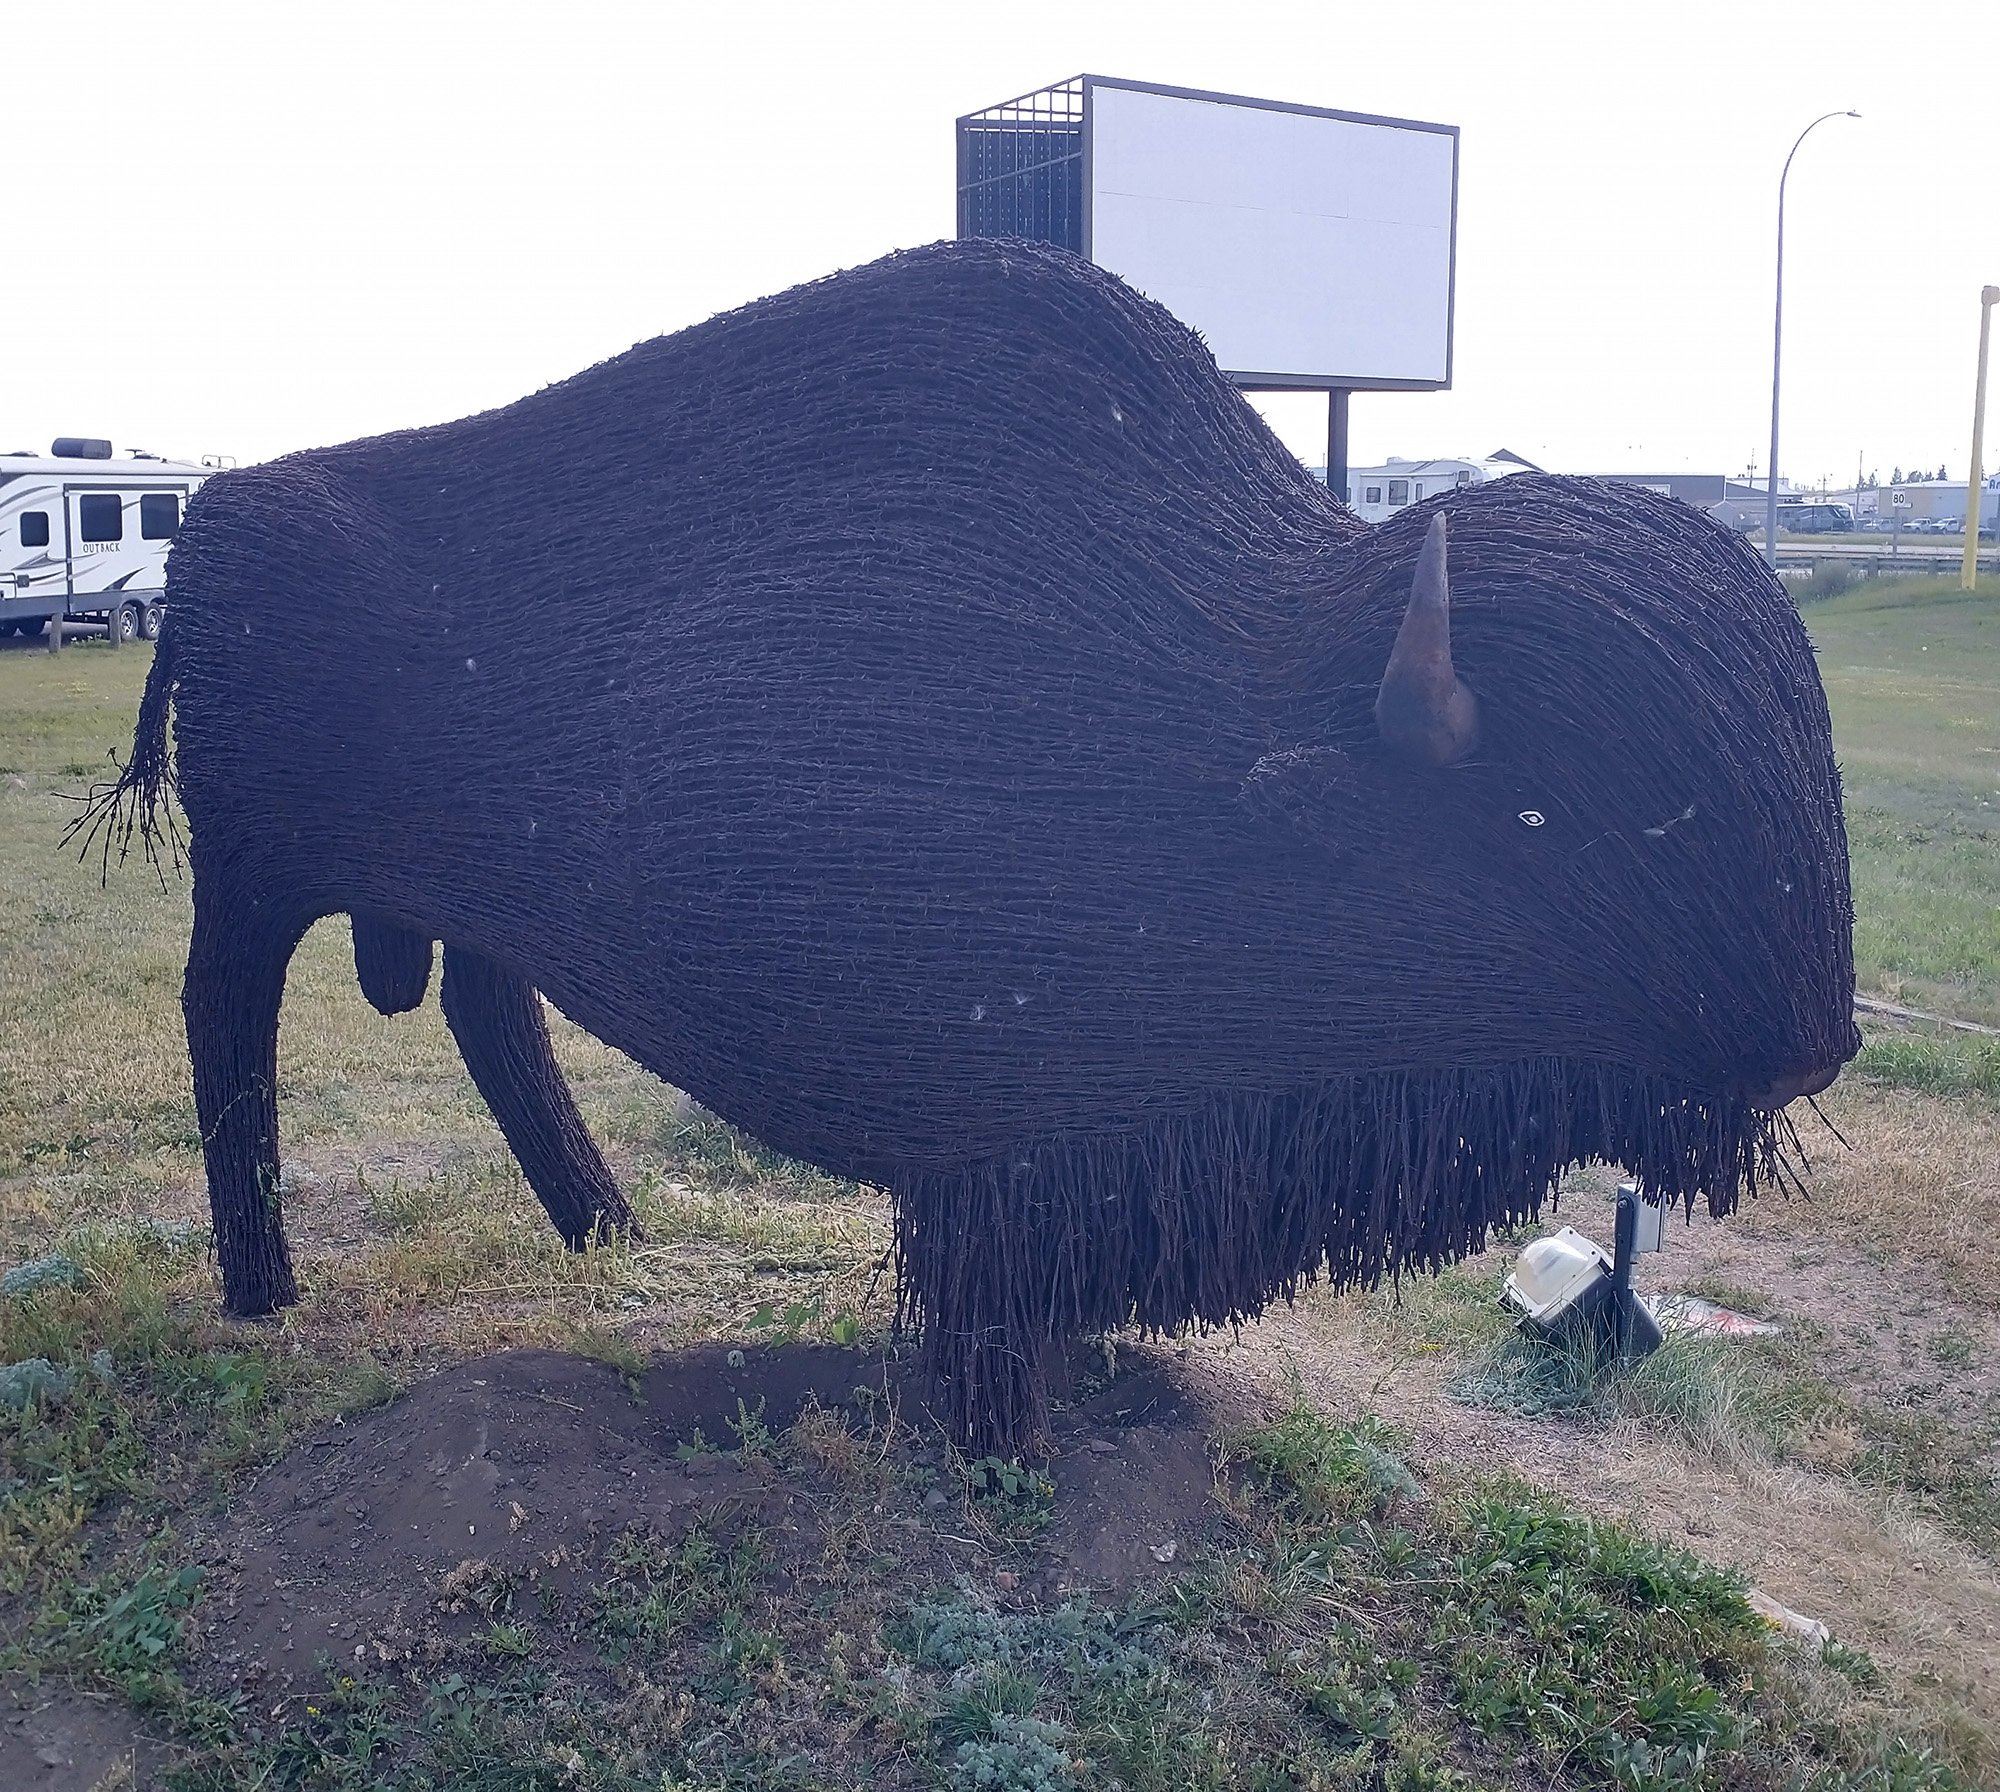 They have a little wire bison there as well.